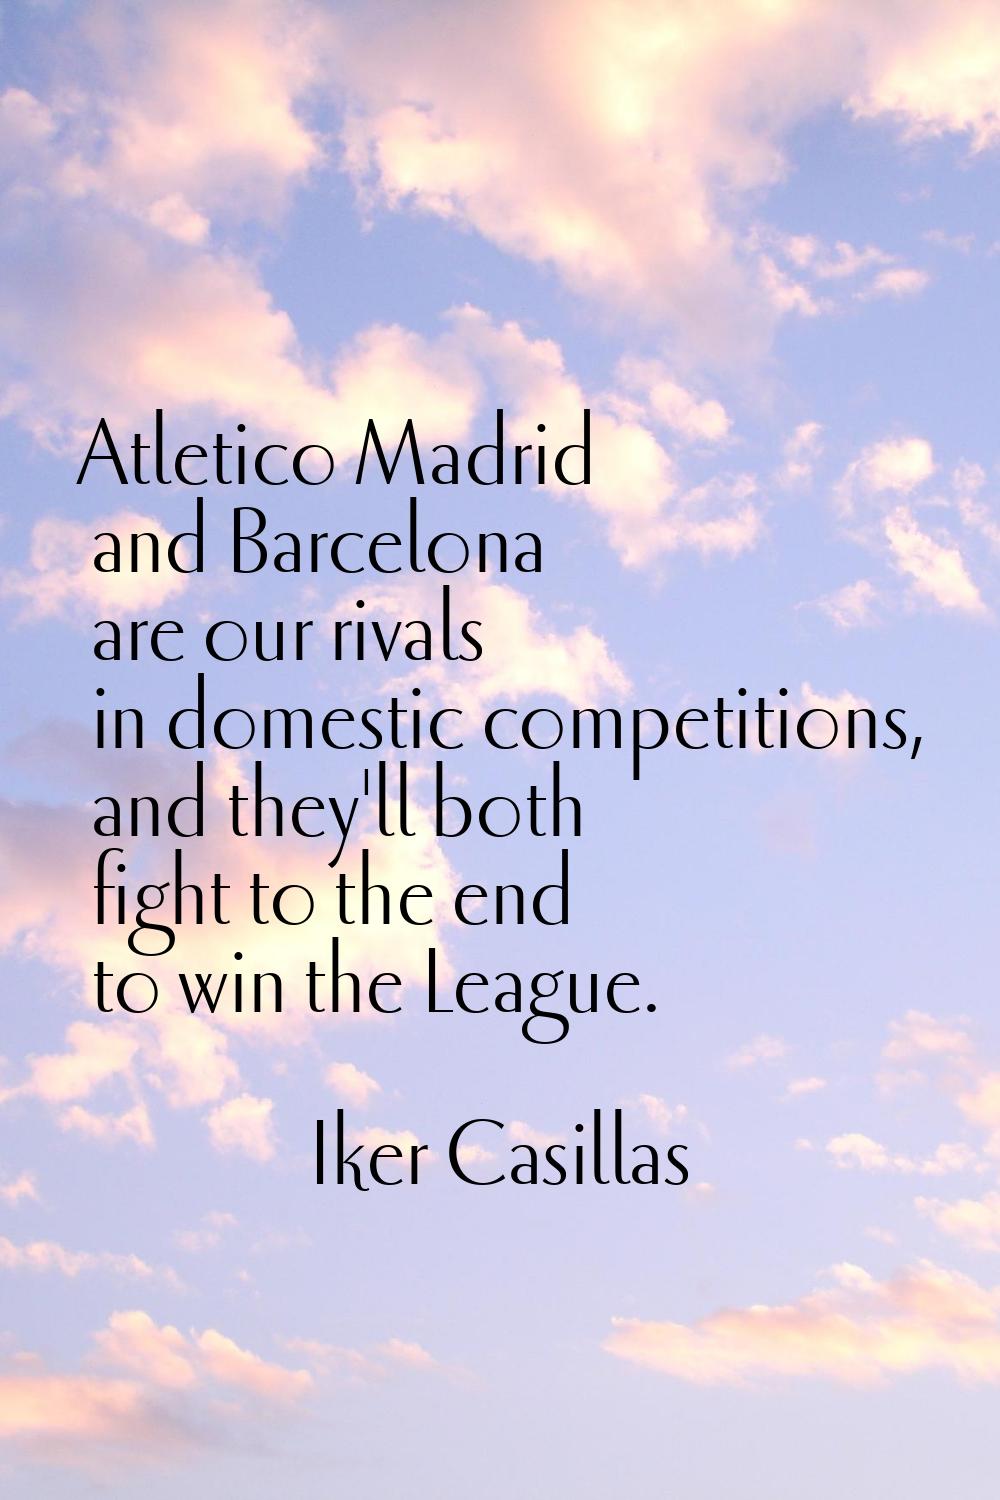 Atletico Madrid and Barcelona are our rivals in domestic competitions, and they'll both fight to th